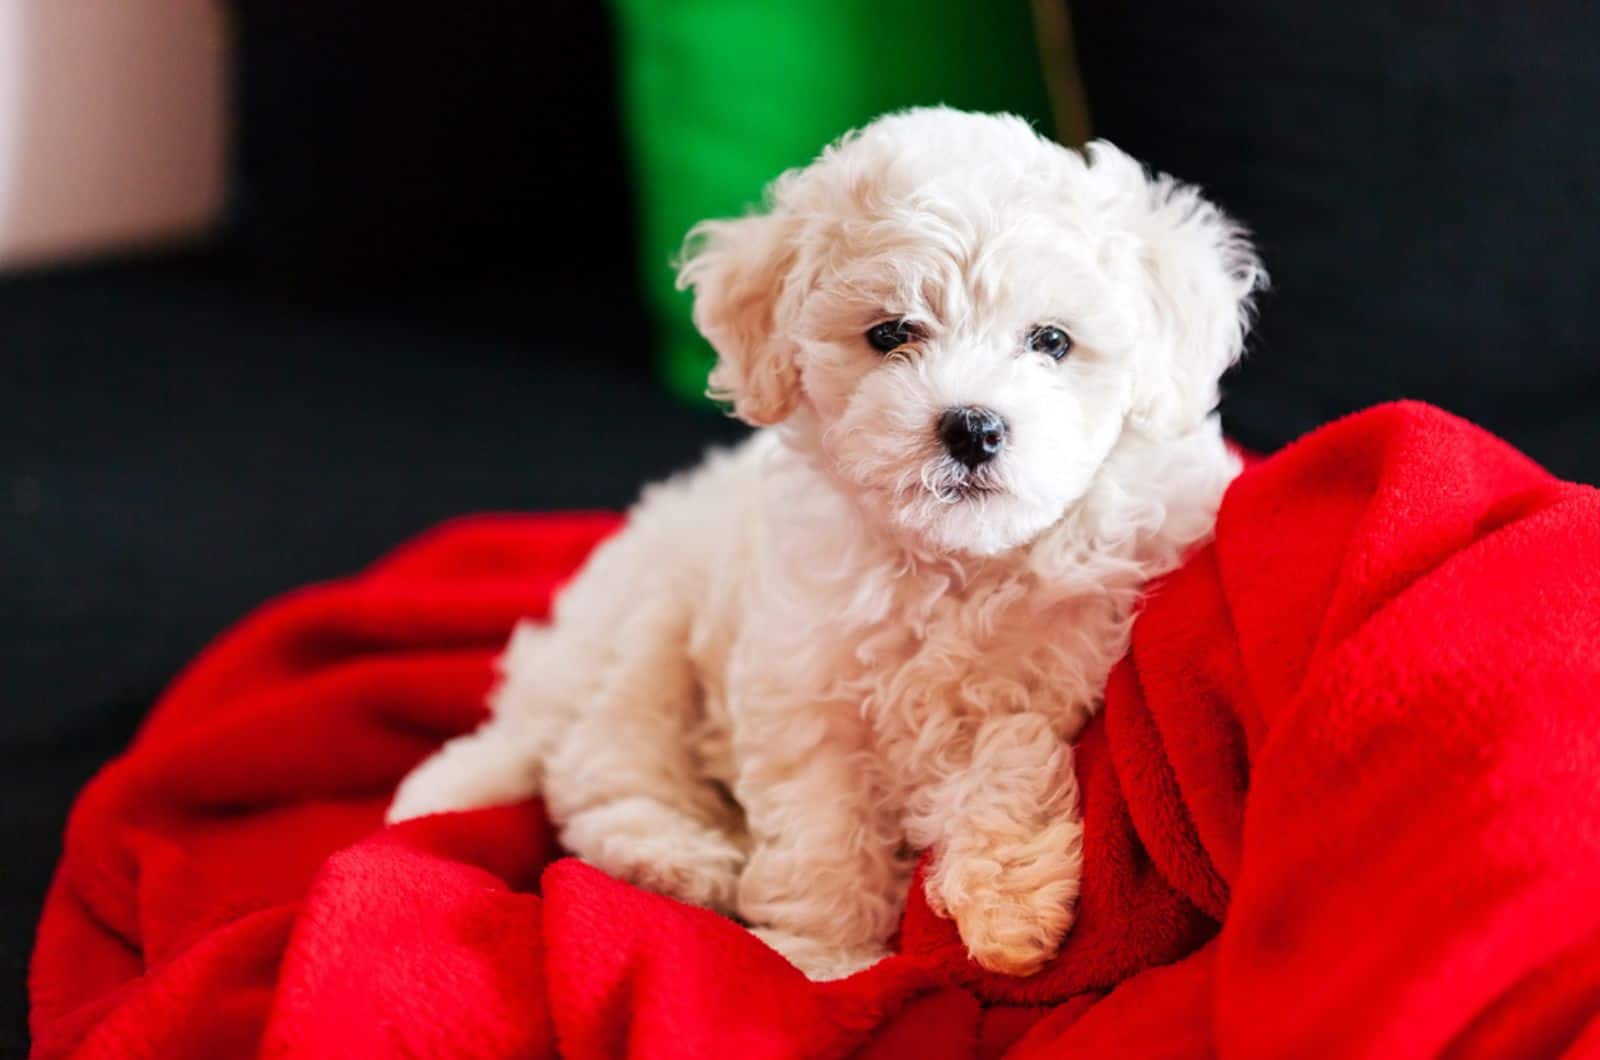 bichon frise sitting on the red blanket